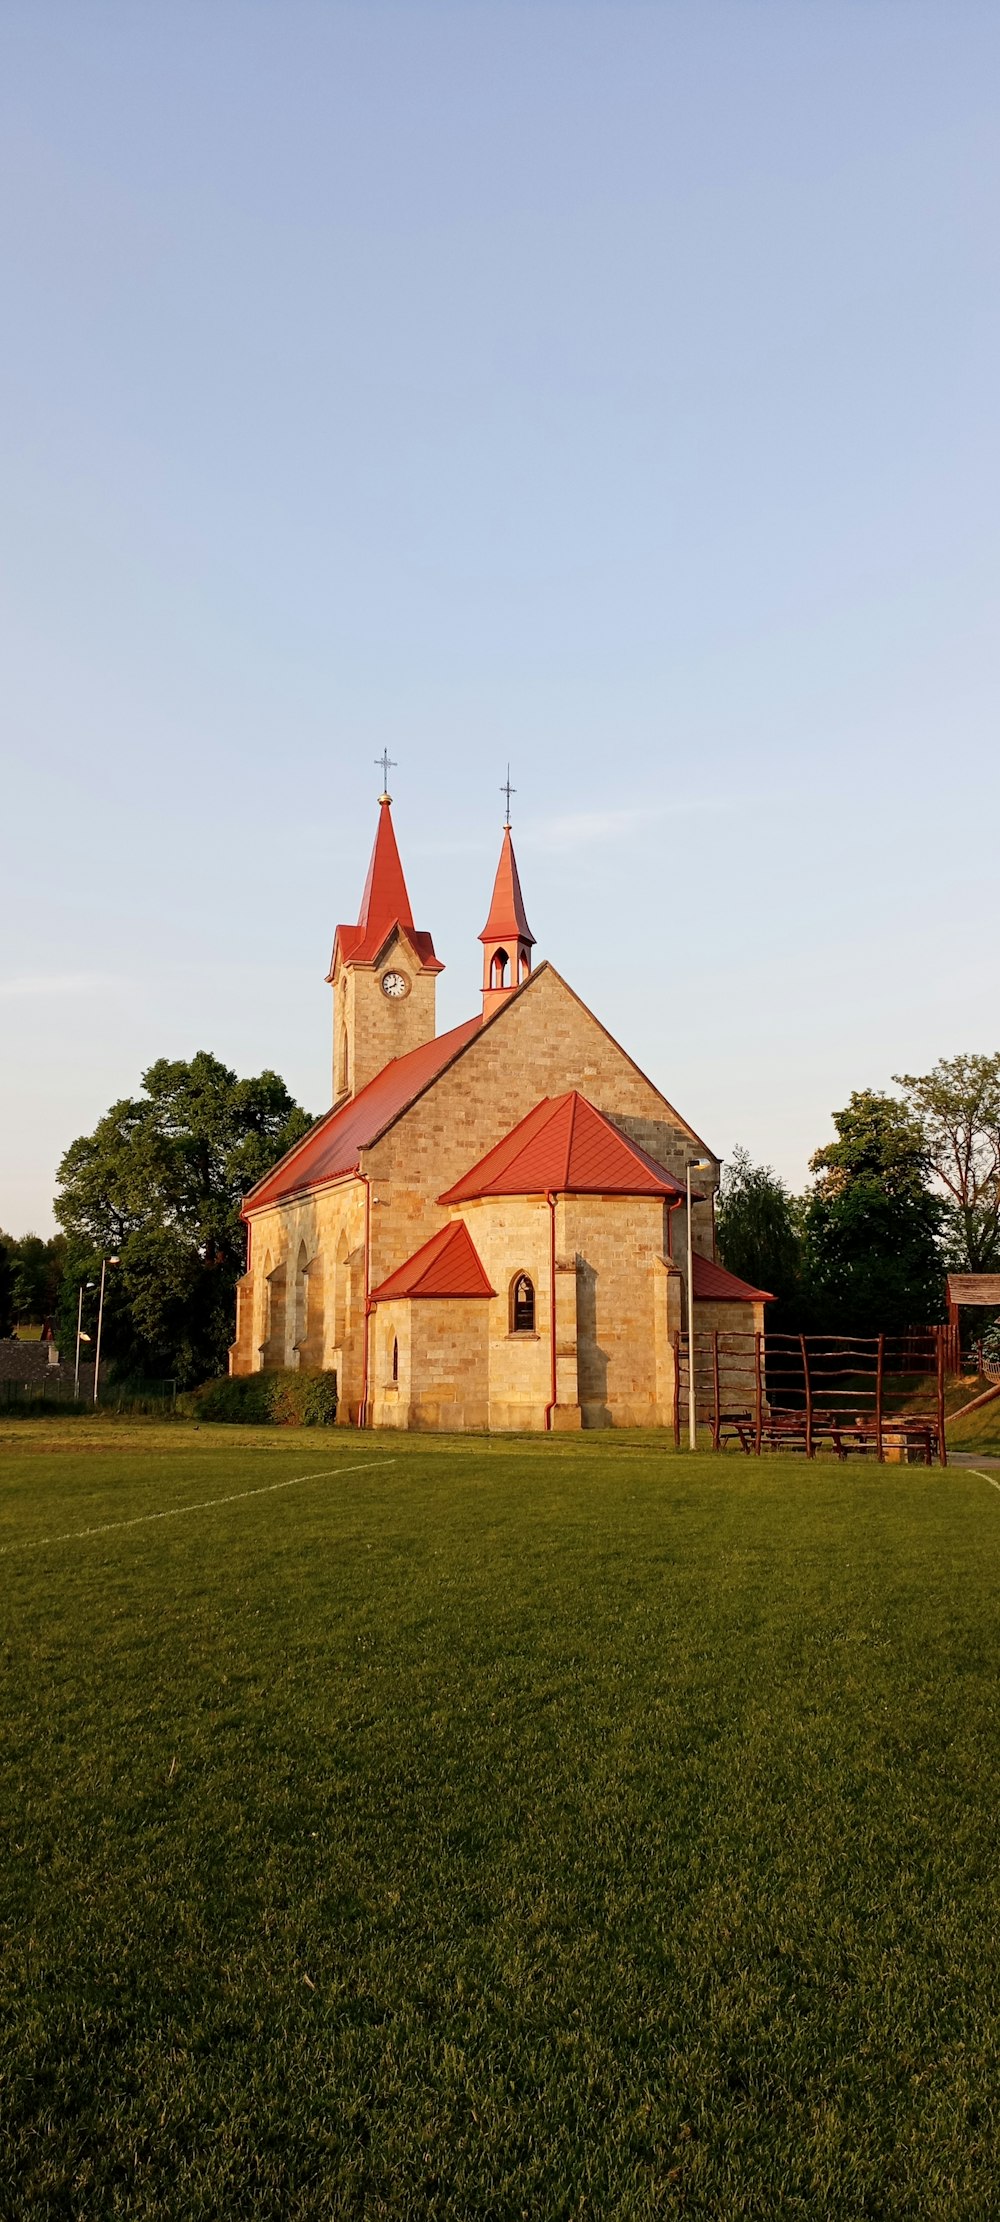 an old church with a red roof and steeple